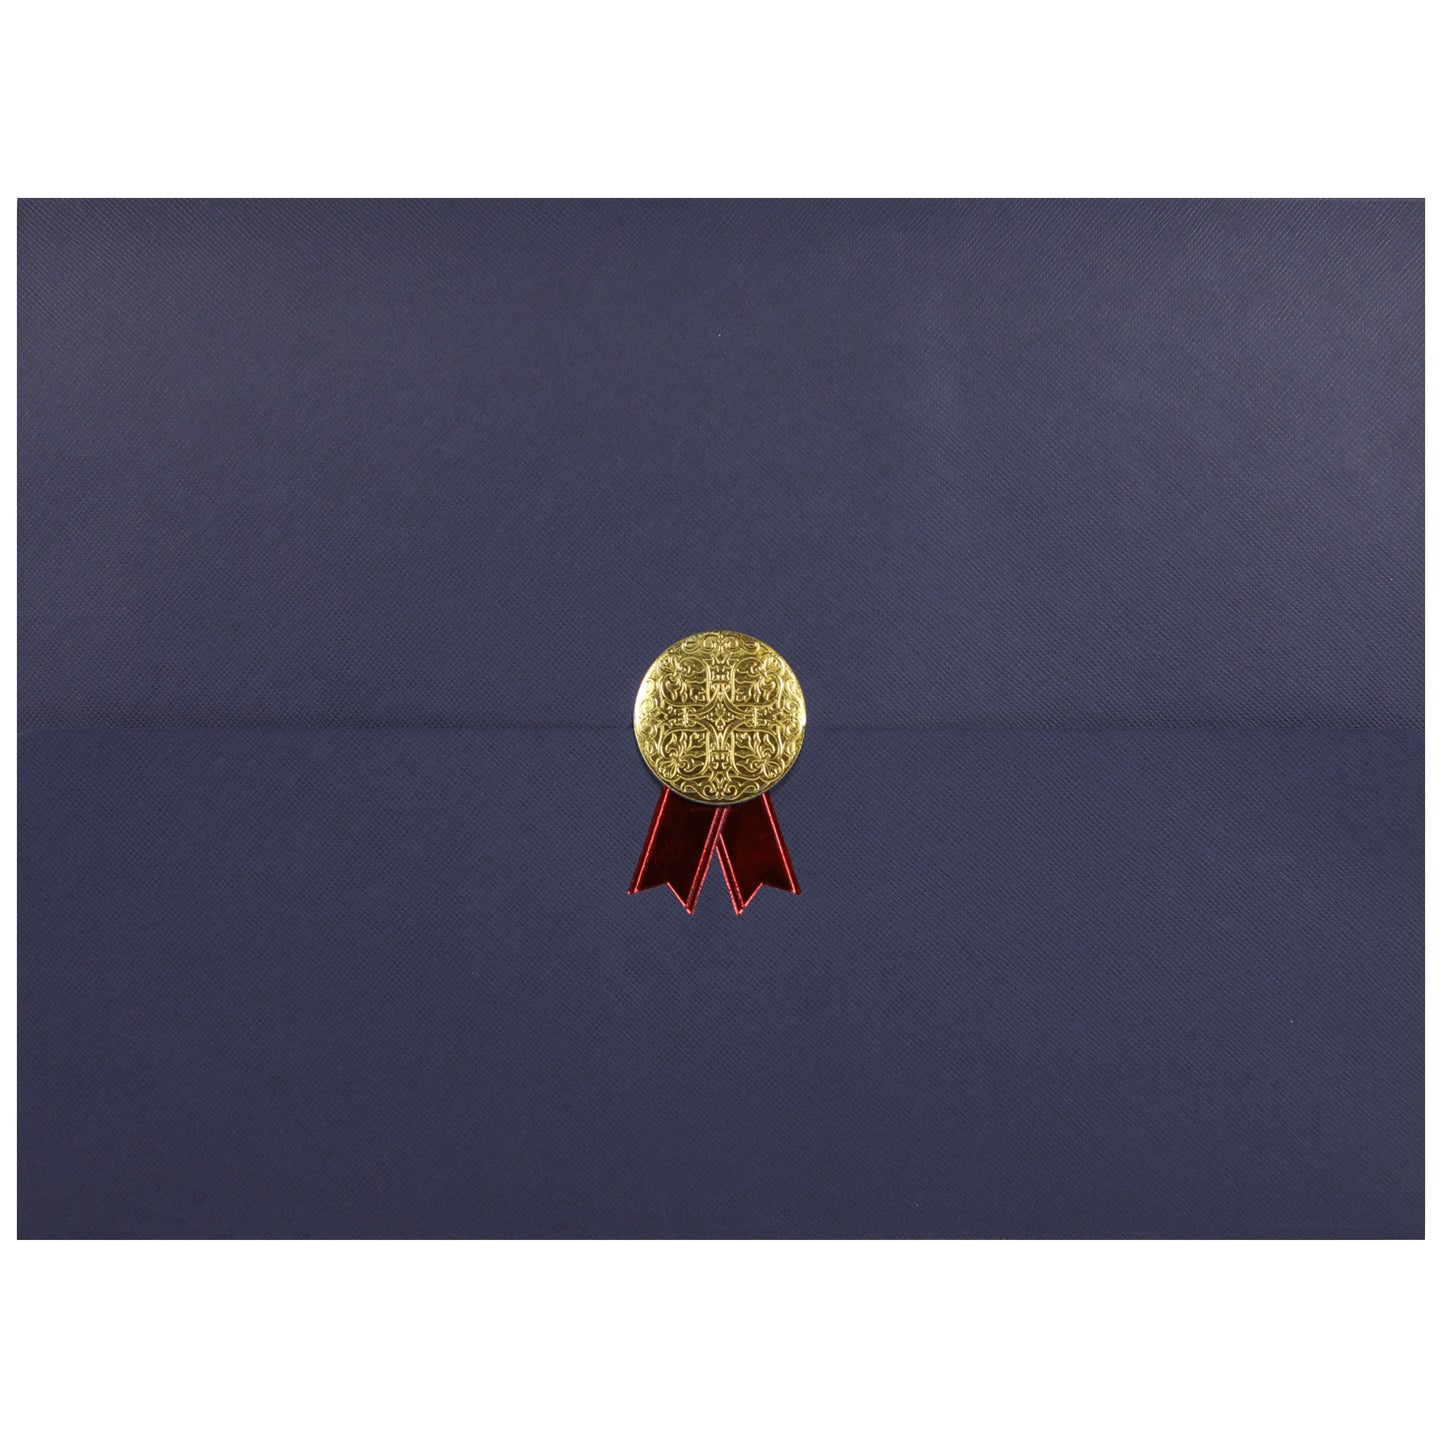 St. James® Certificate Holders/Document Covers/Diploma Holders, Navy Blue, Gold Award Seal with Red Ribbon, Pack of 5